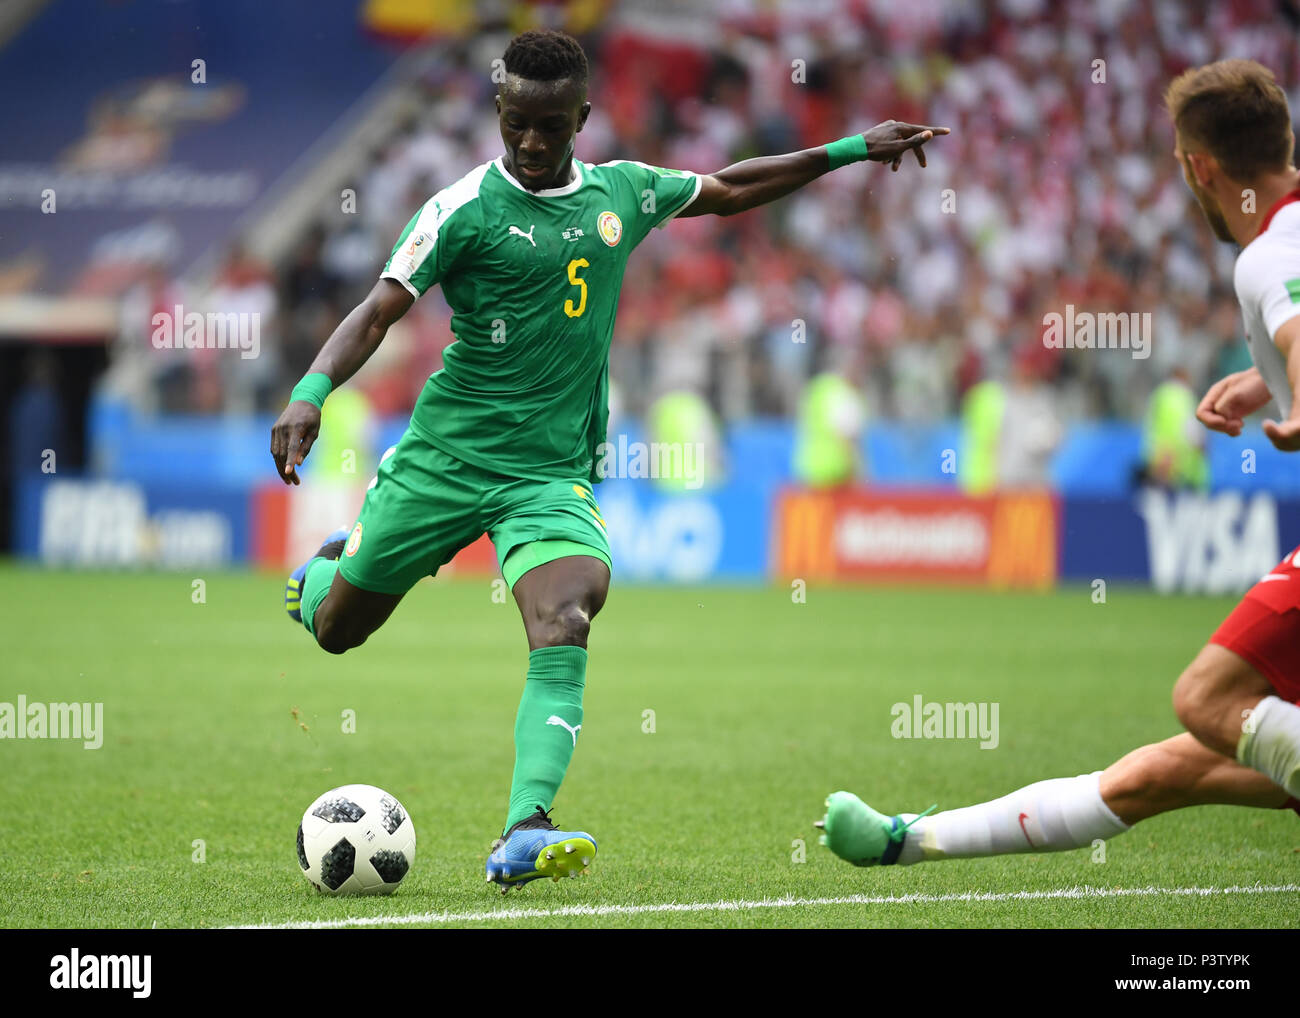 Moscow, Russia. 19th June, 2018. Soccer: World Cup 2018, group stages, group H: Poland vs Senegal at Spartak Stadium. Senegal's Idrissa Gueye shoots at the goal. Credit: Federico Gambarini/dpa/Alamy Live News Stock Photo